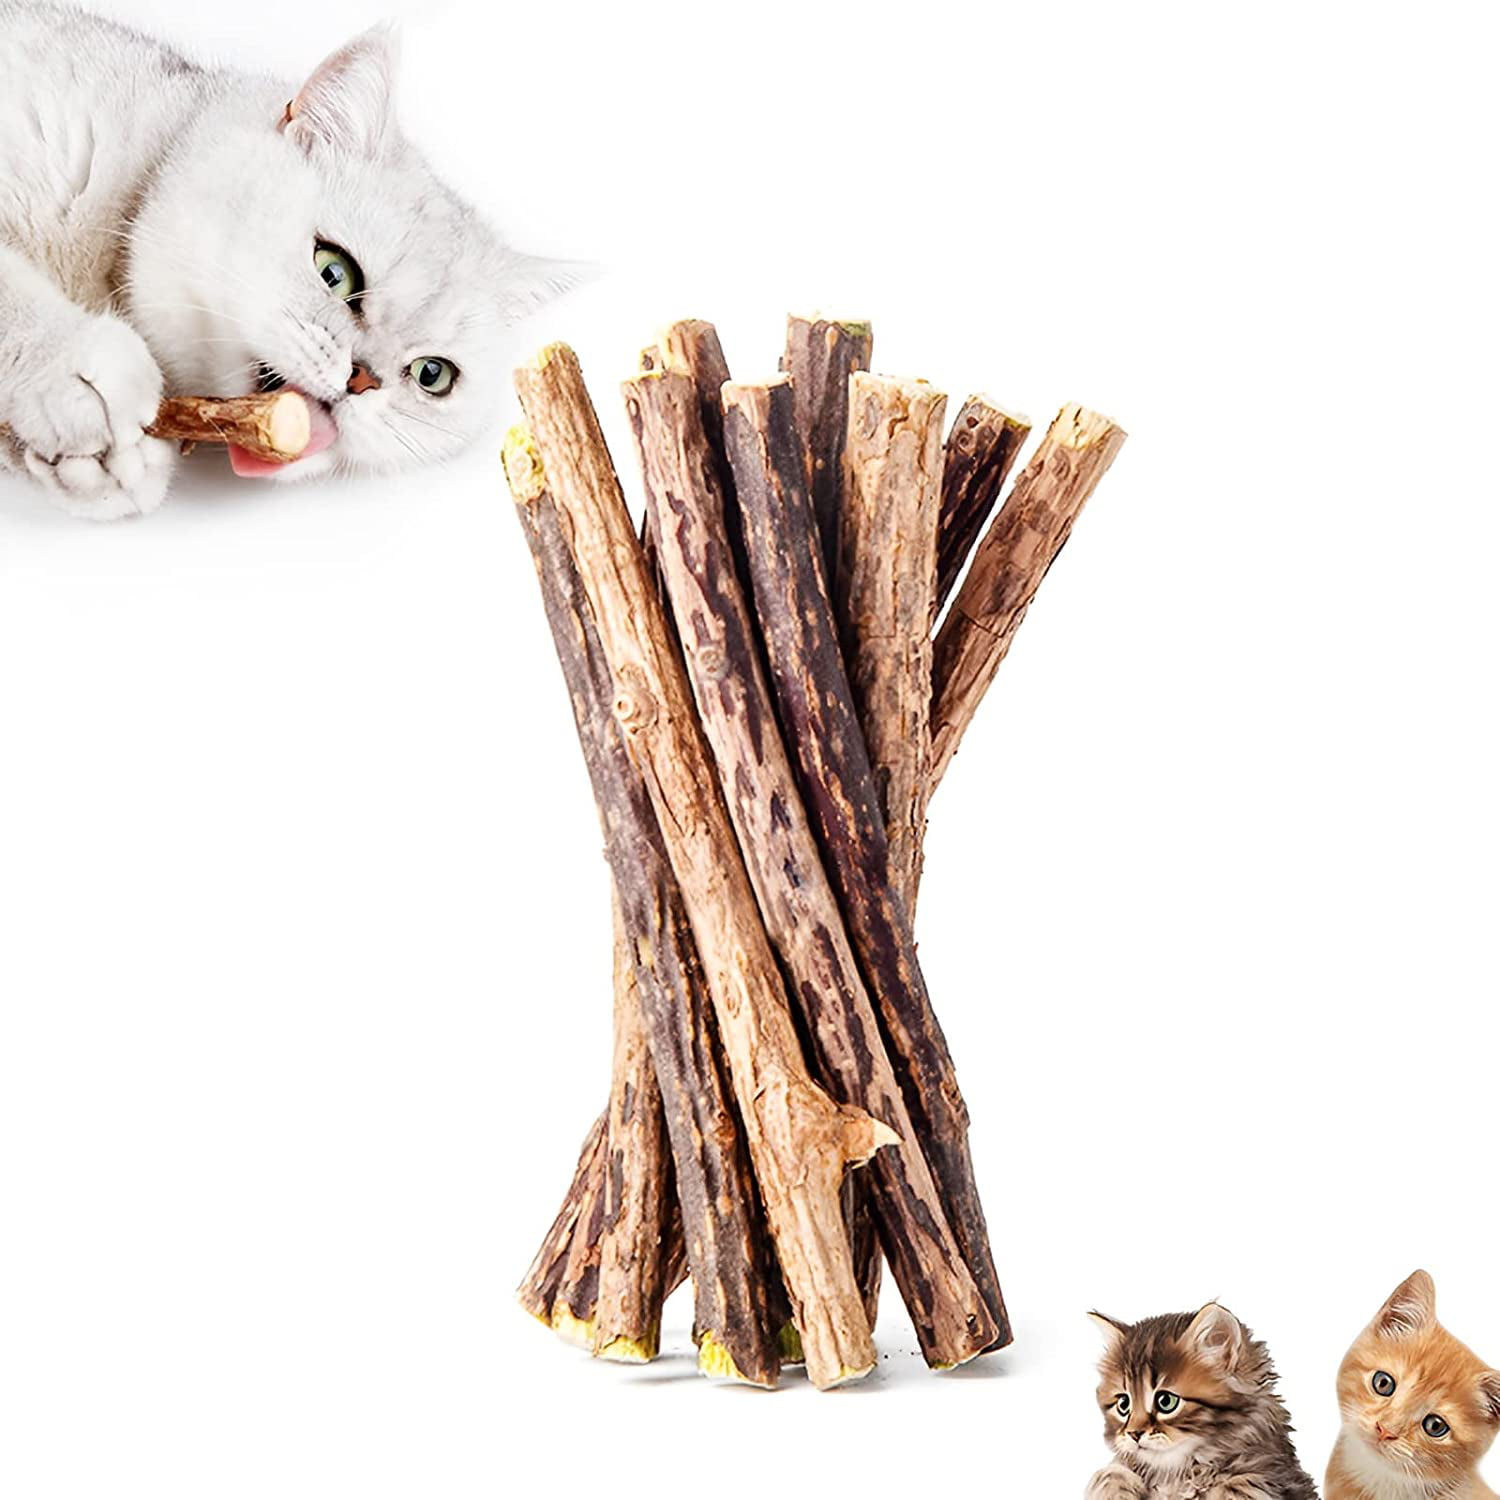 13 Pcs Catnip Sticks for Cat Set Natural Matatabi Sticks Catnip Mouse Toys Cleaning Teeth Chew Catnip Toys for Indoor Cat Teeth Cleaning Kitten Teething and Stress Release 